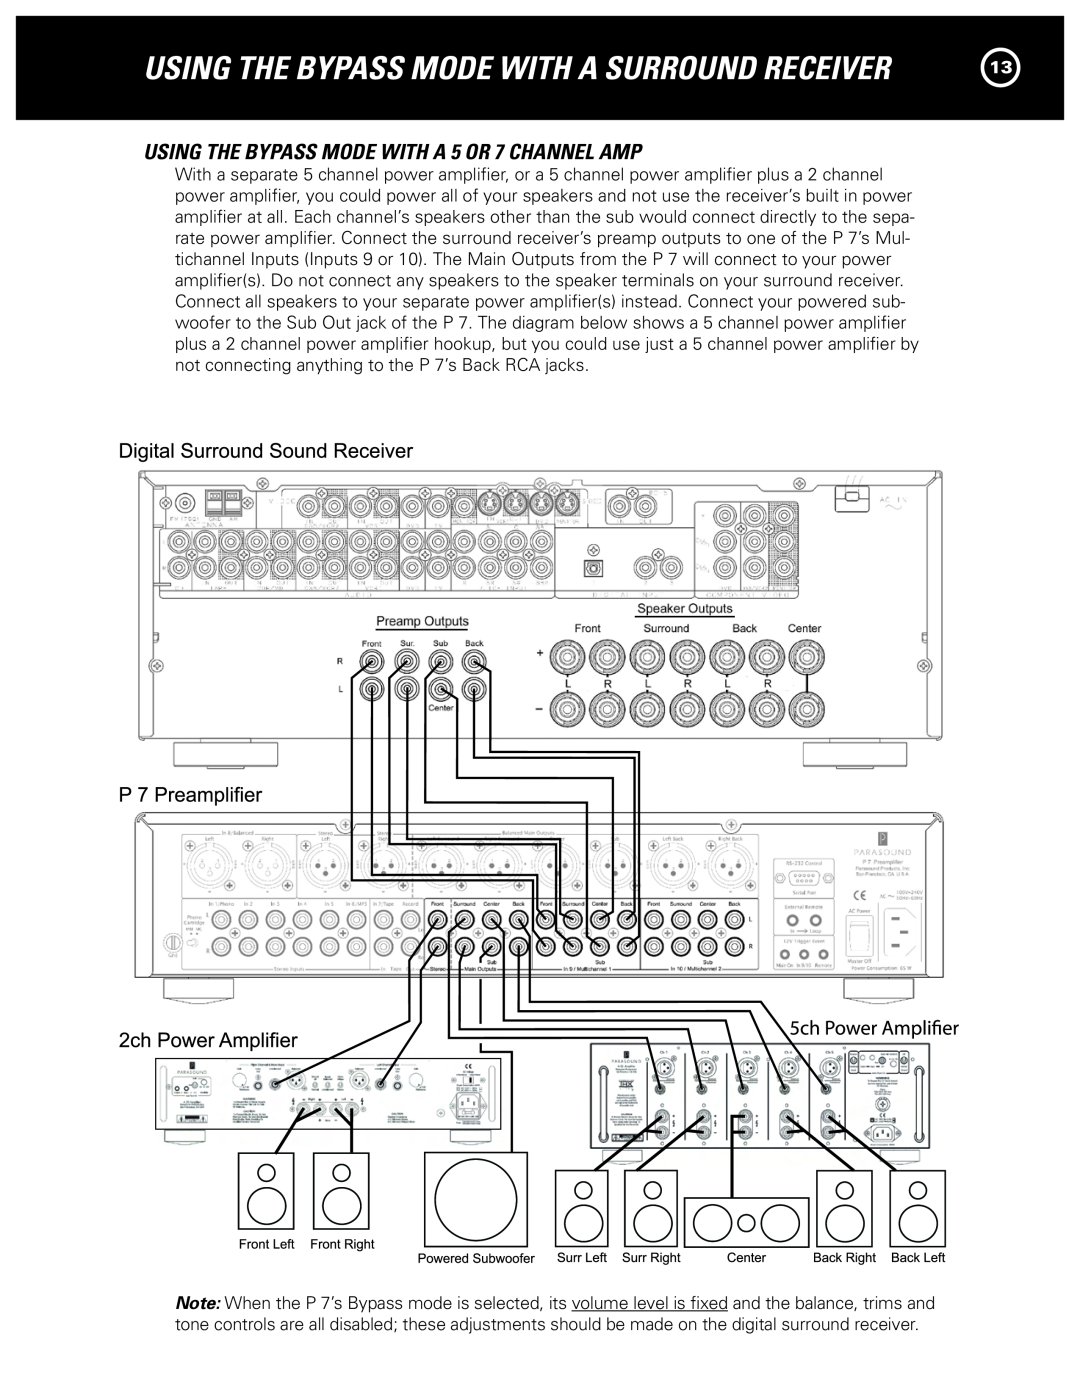 Parasound P 7 manual Using The Bypass Mode With A Surround Receiver, USING THE BYPASS MODE WITH A 5 OR 7 CHANNEL AMP 